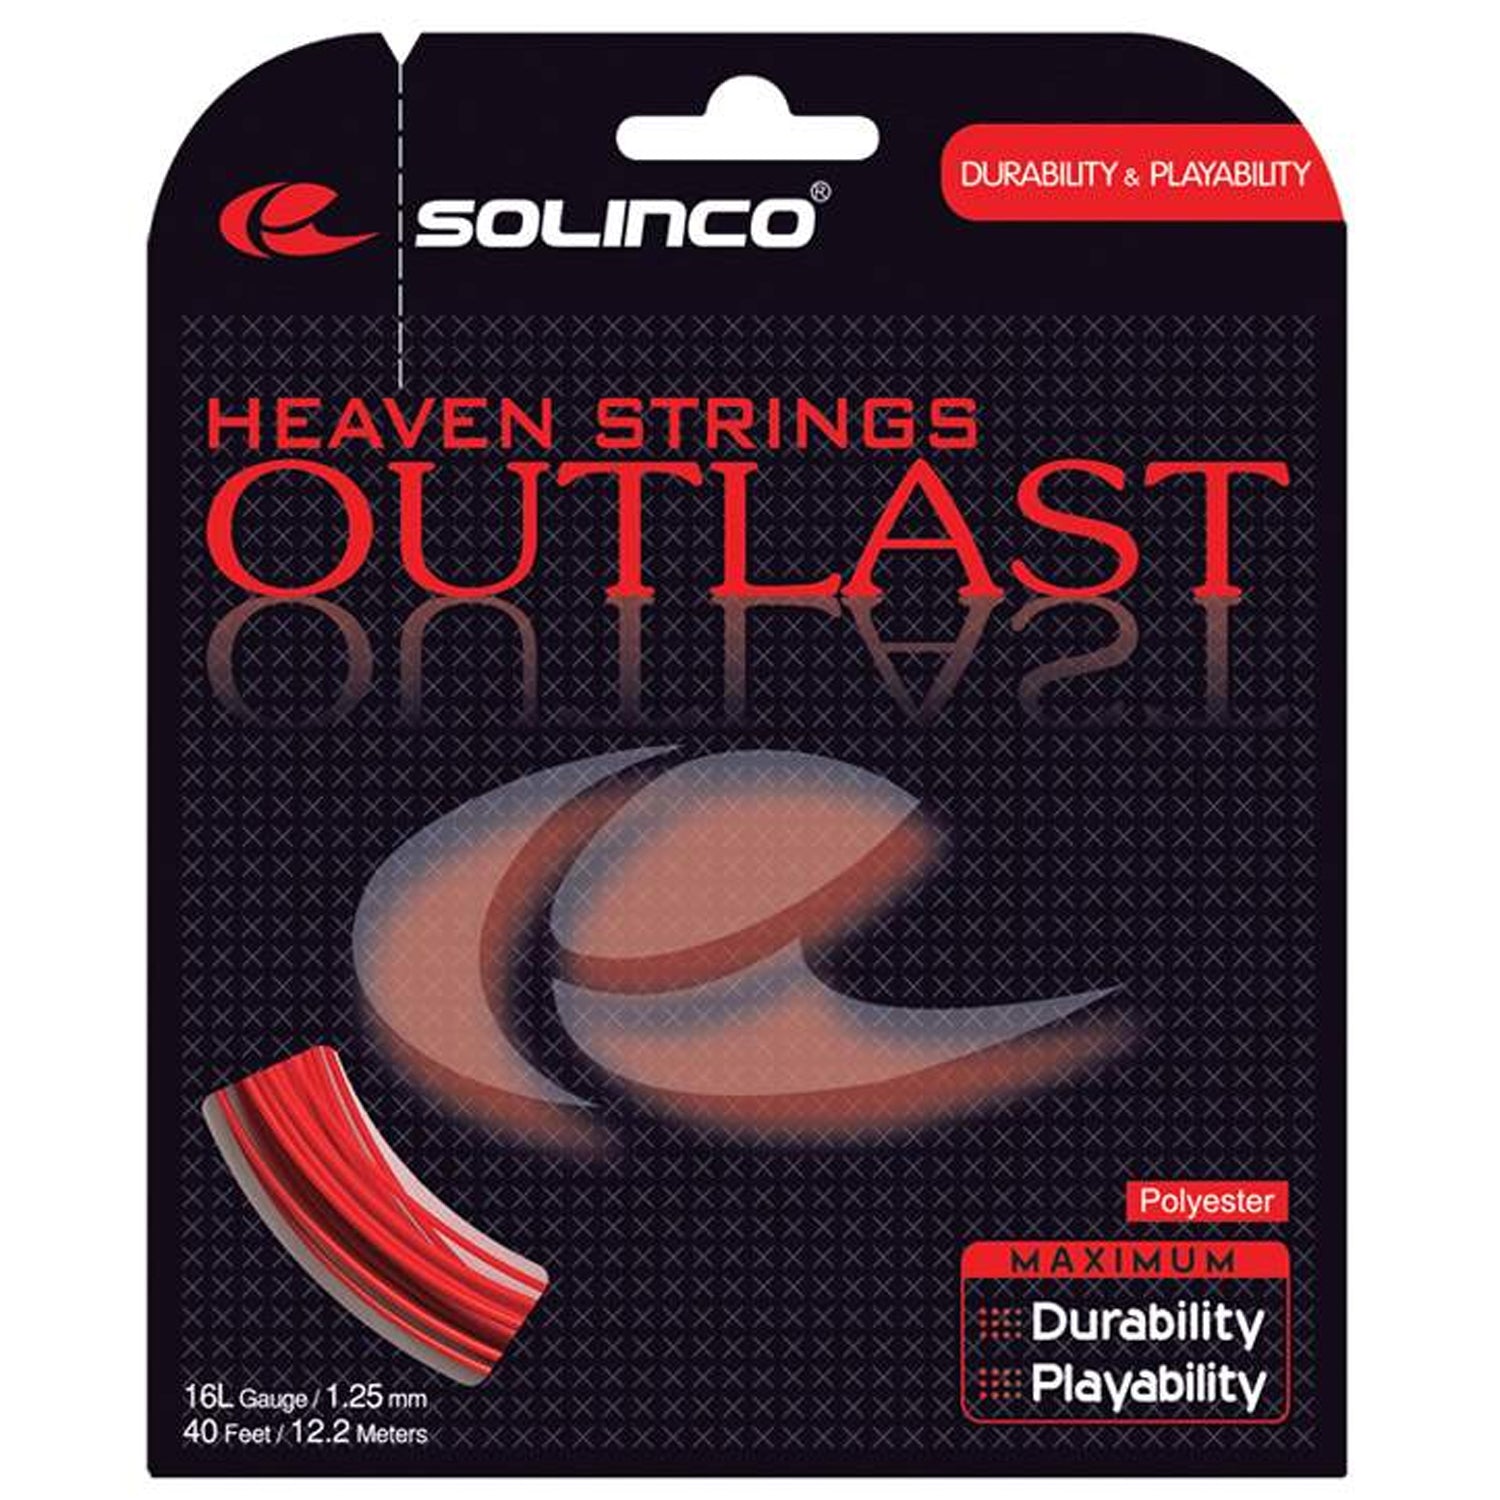 Solinco Outlast 16L Guage (1.25MM) Tennis String,Red - Best Price online Prokicksports.com